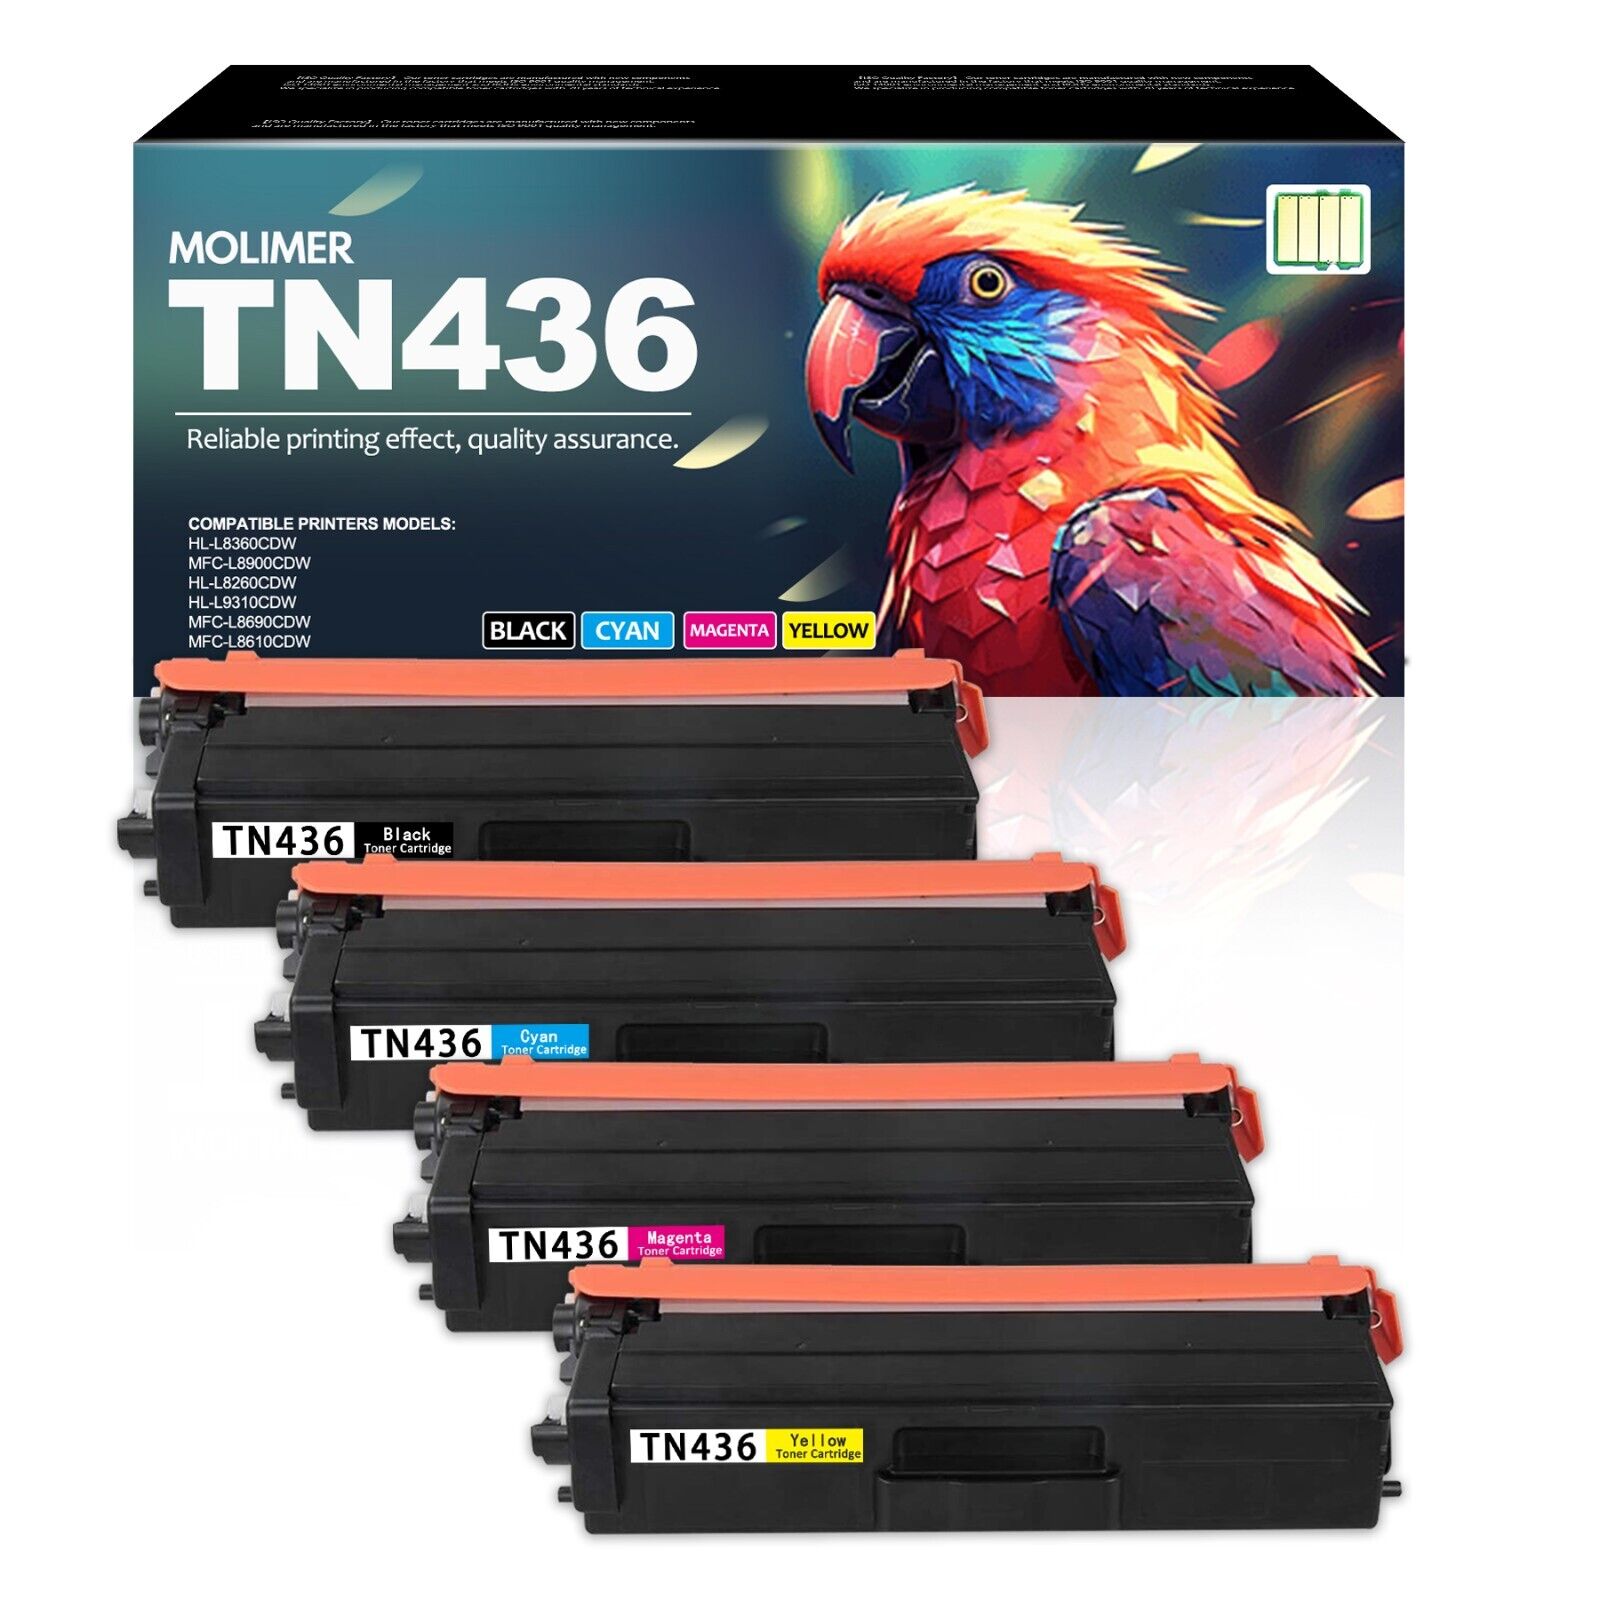 TN436 Toner High Yield Replacement for Brother TN-436 HL-L8360CDW (1BK/1C/1Y/1M)